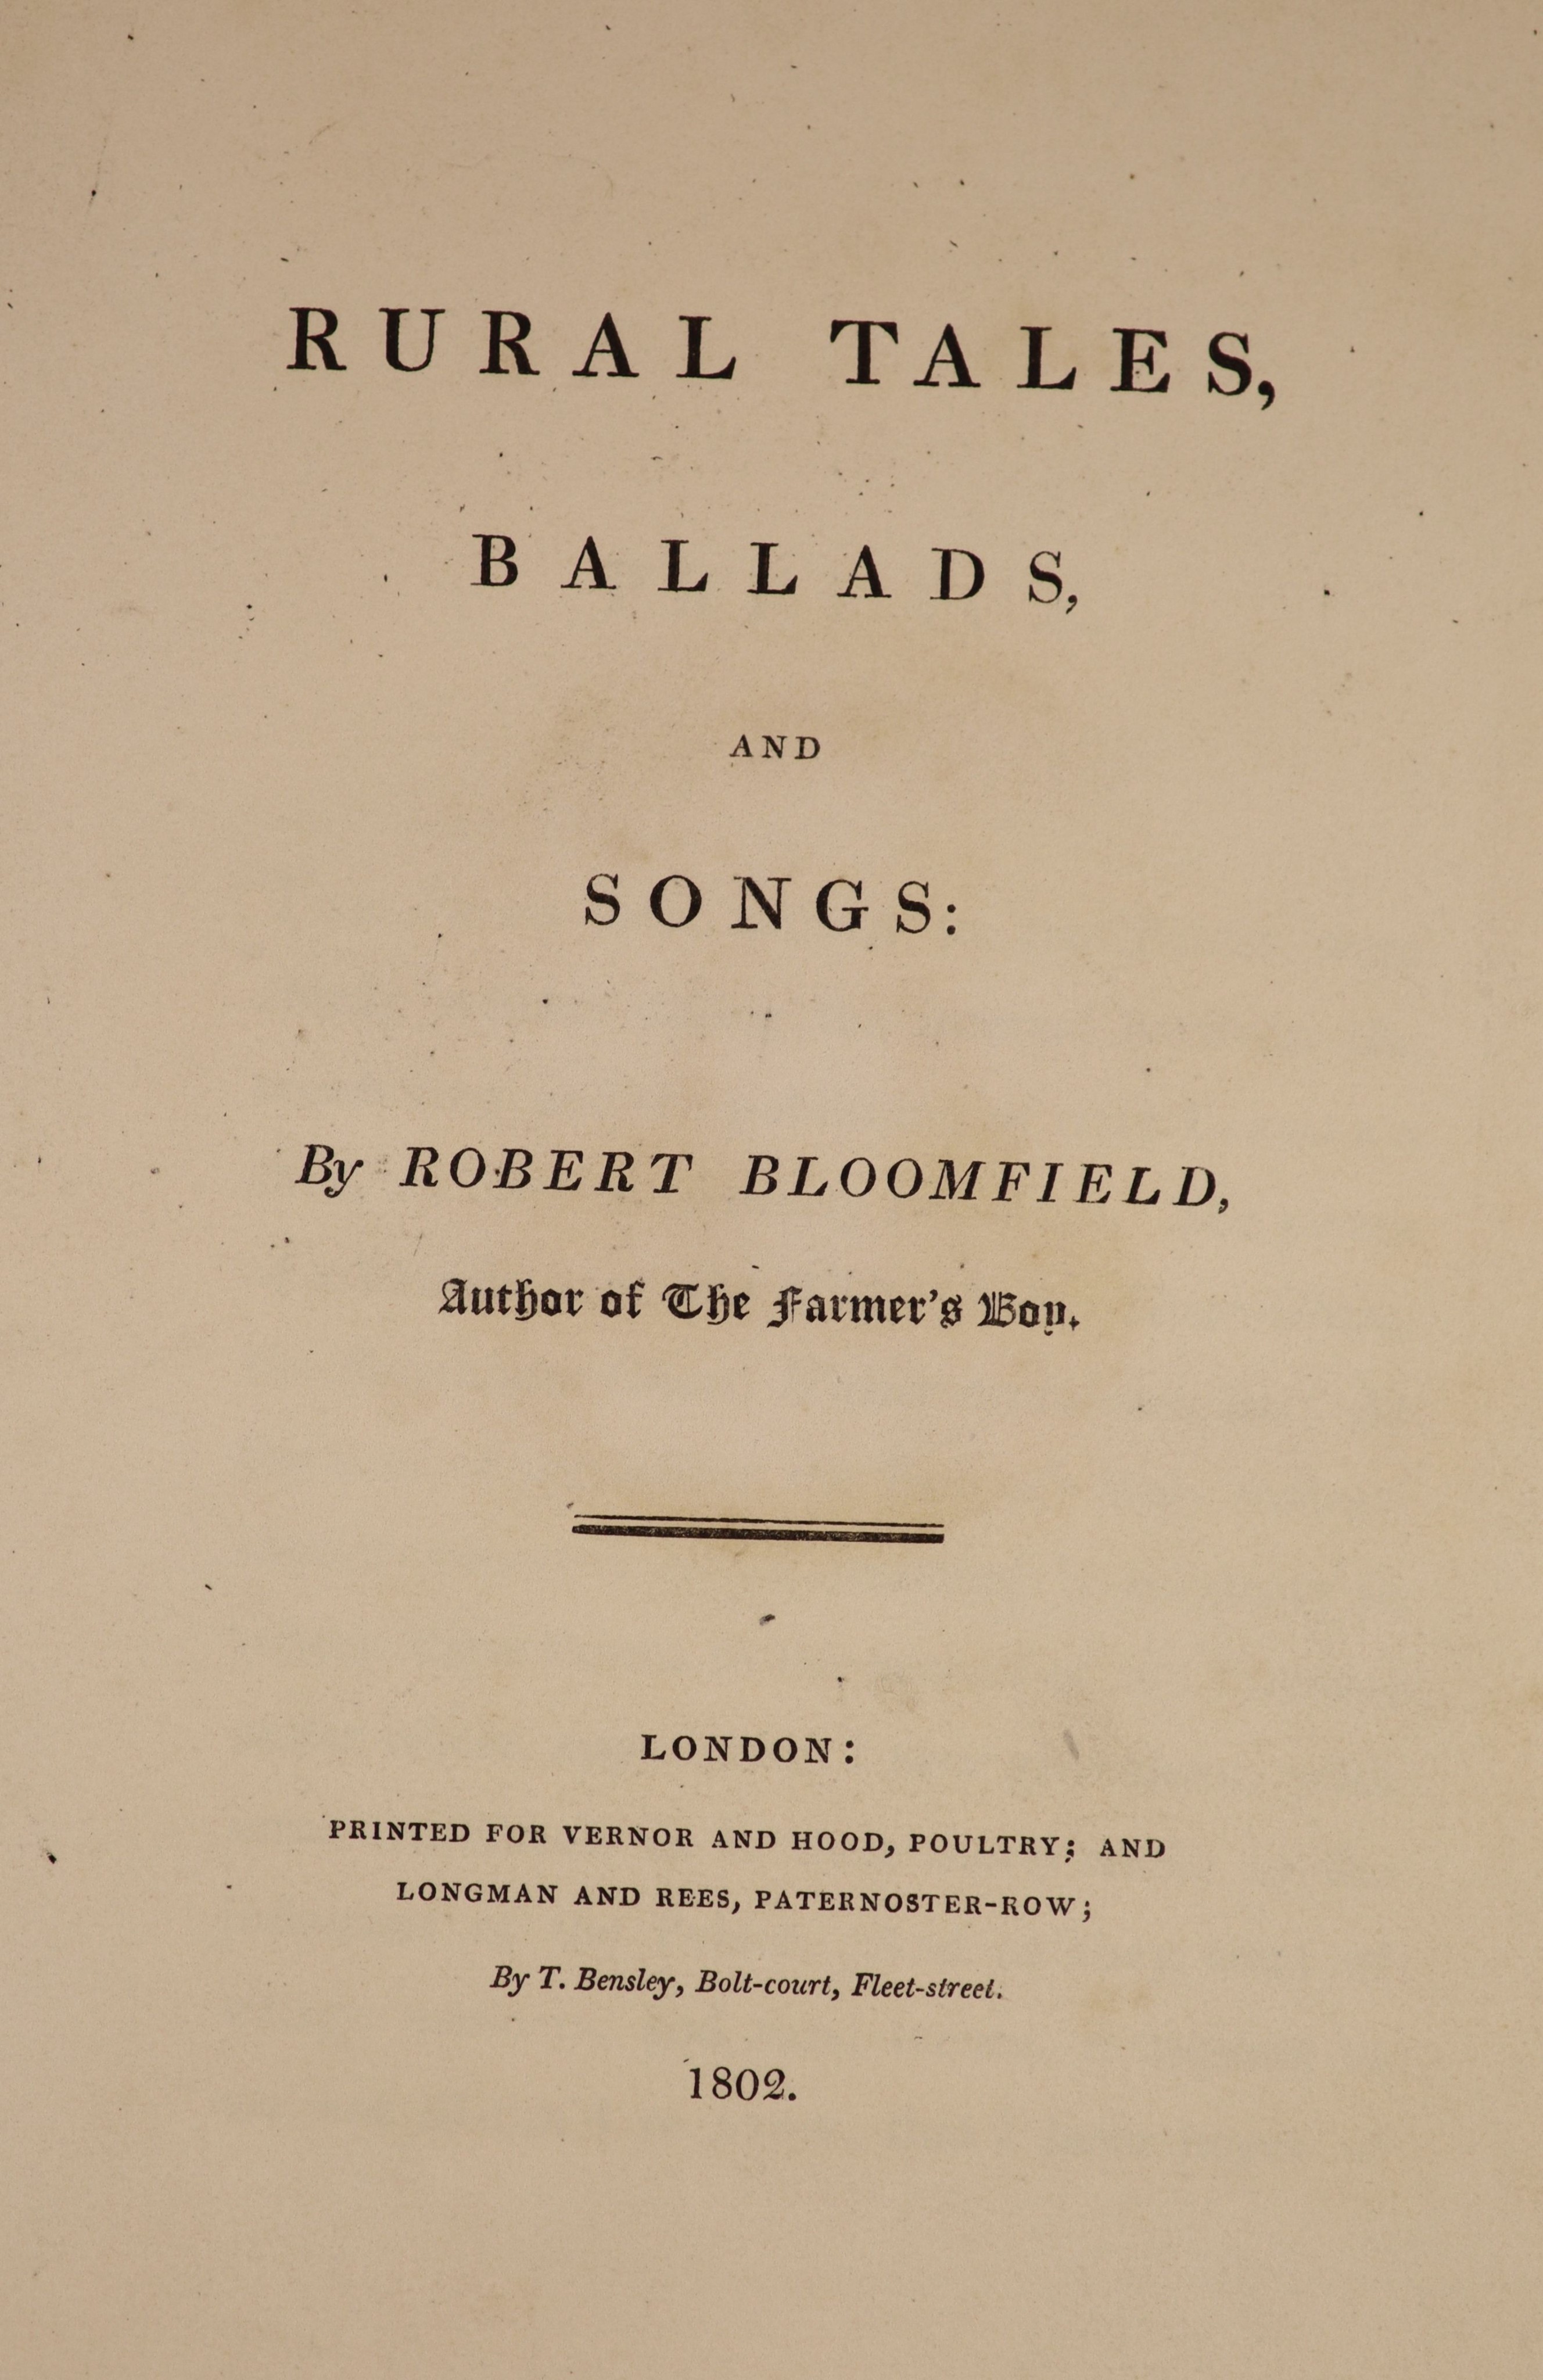 Bloomfield, Robert - Rural Tales, Ballads, and Songs, 1st edition, 4to, later half calf gilt lettered front board, woodcuts by Thomas Bewick, bookplate of Lord Battersea (1843-1907), Vernor and Hood et al, London, 1802